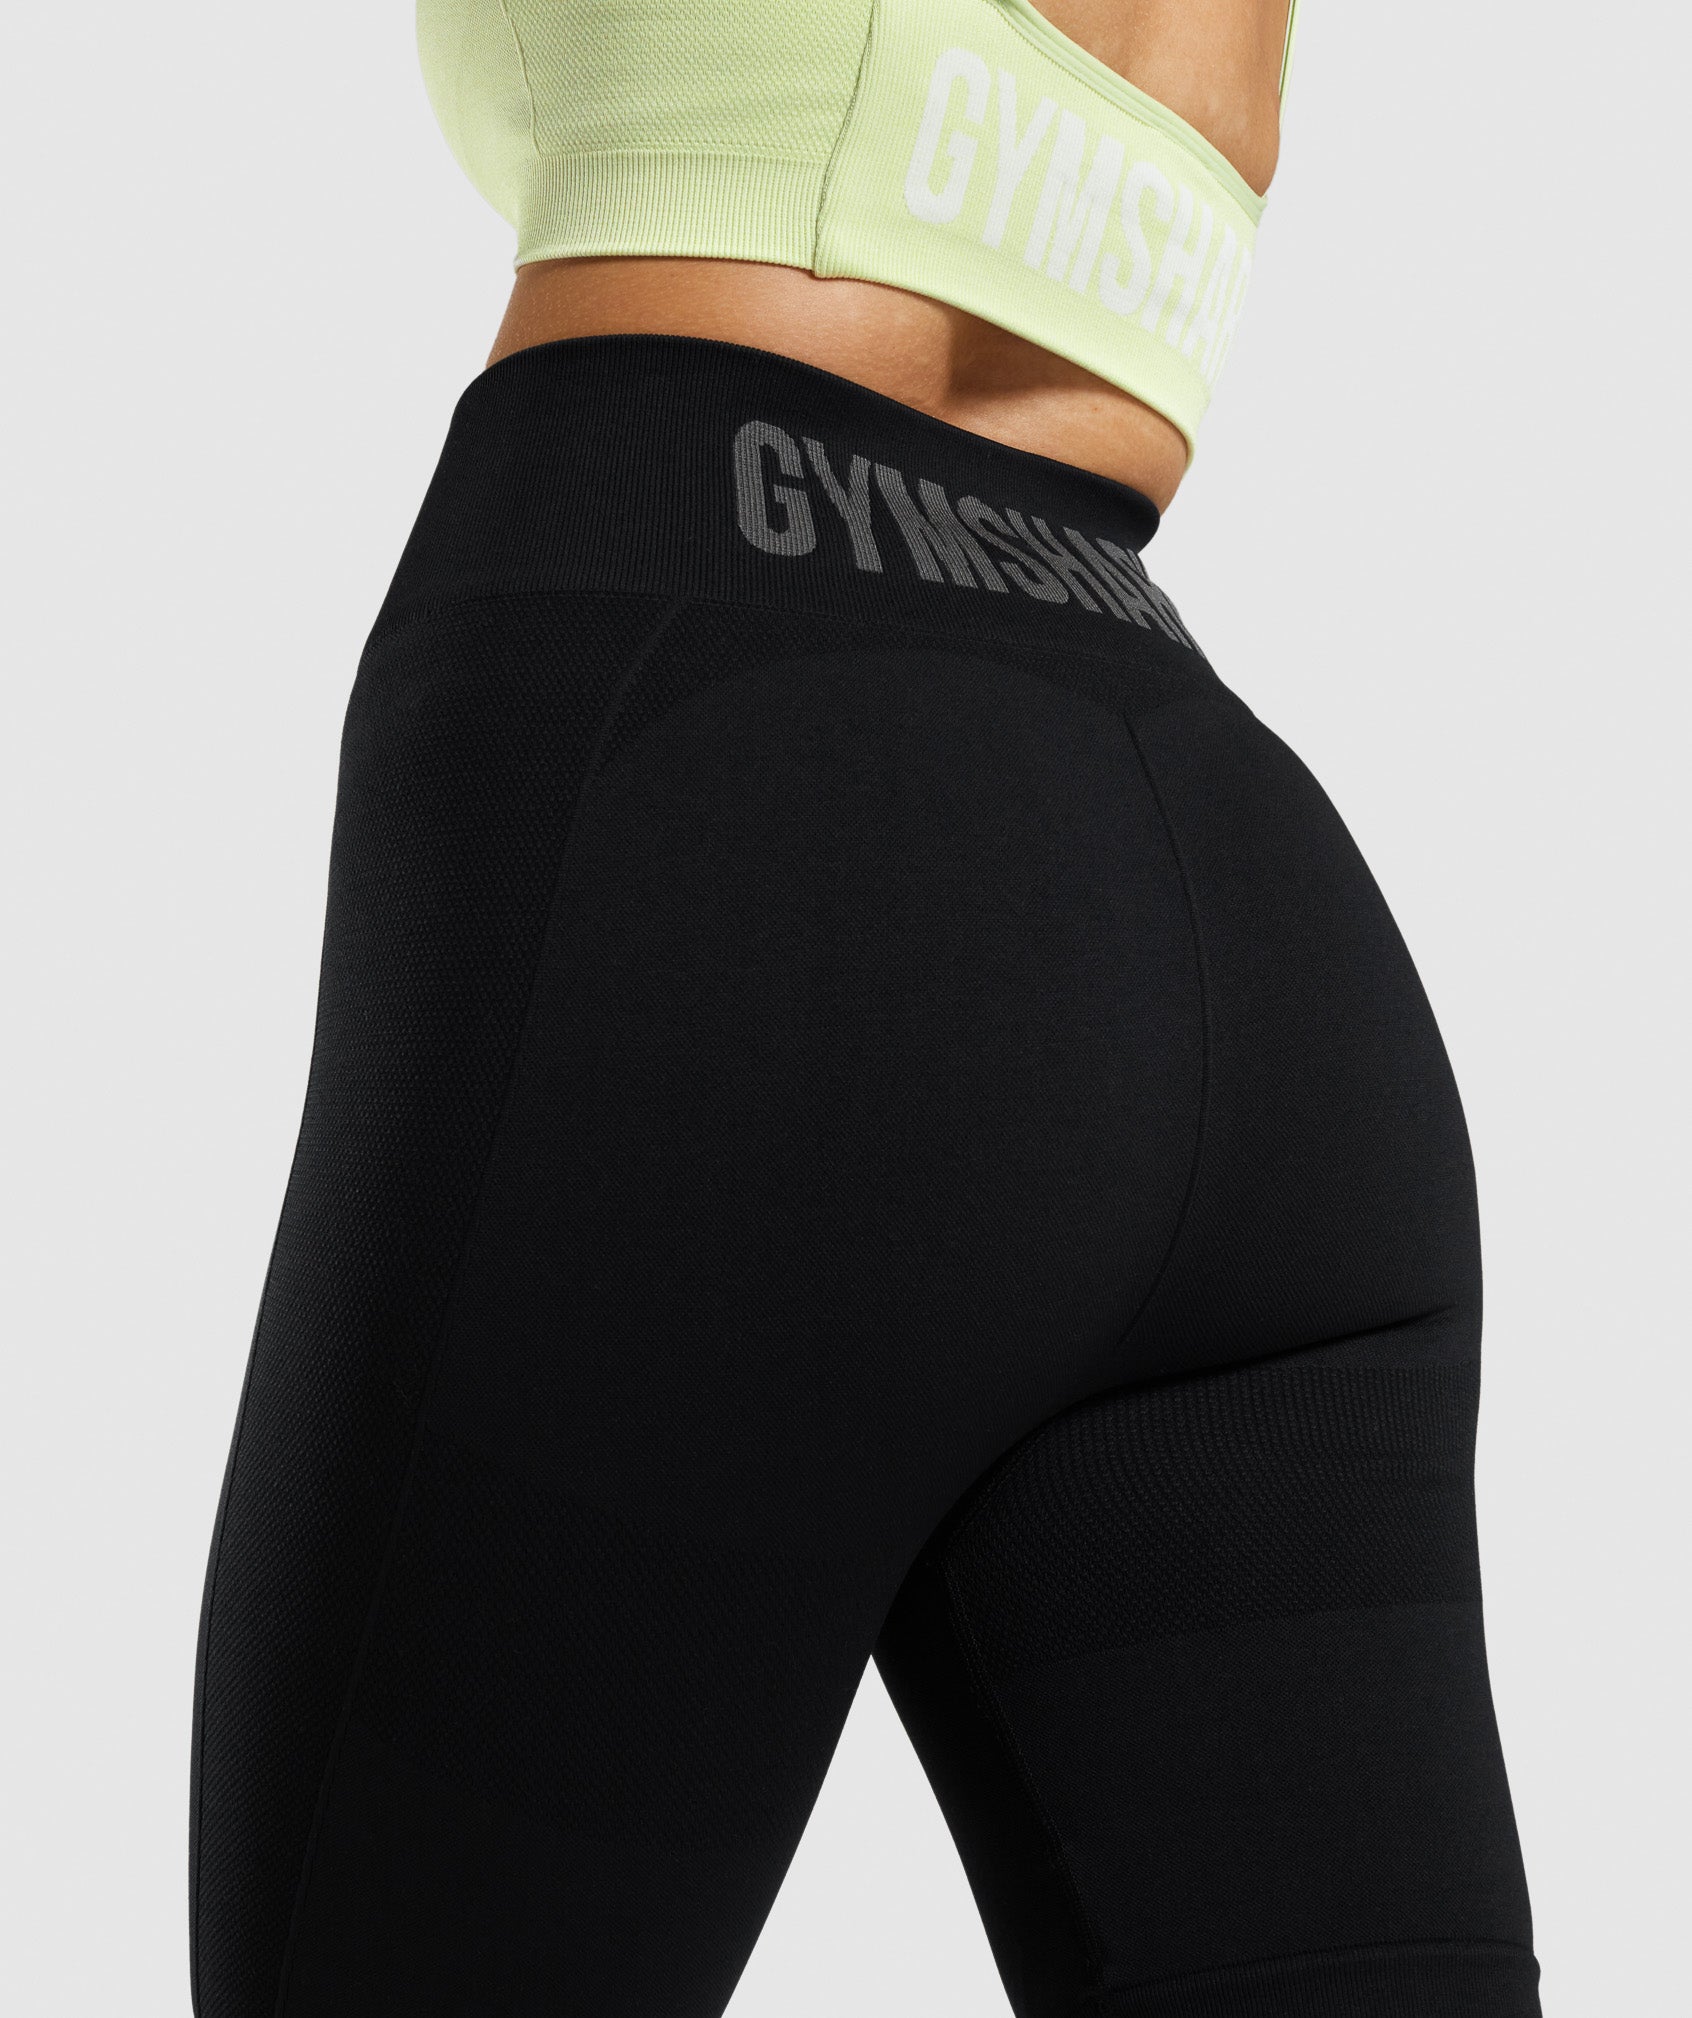 Flex Cycling Shorts in Black/Charcoal - view 6